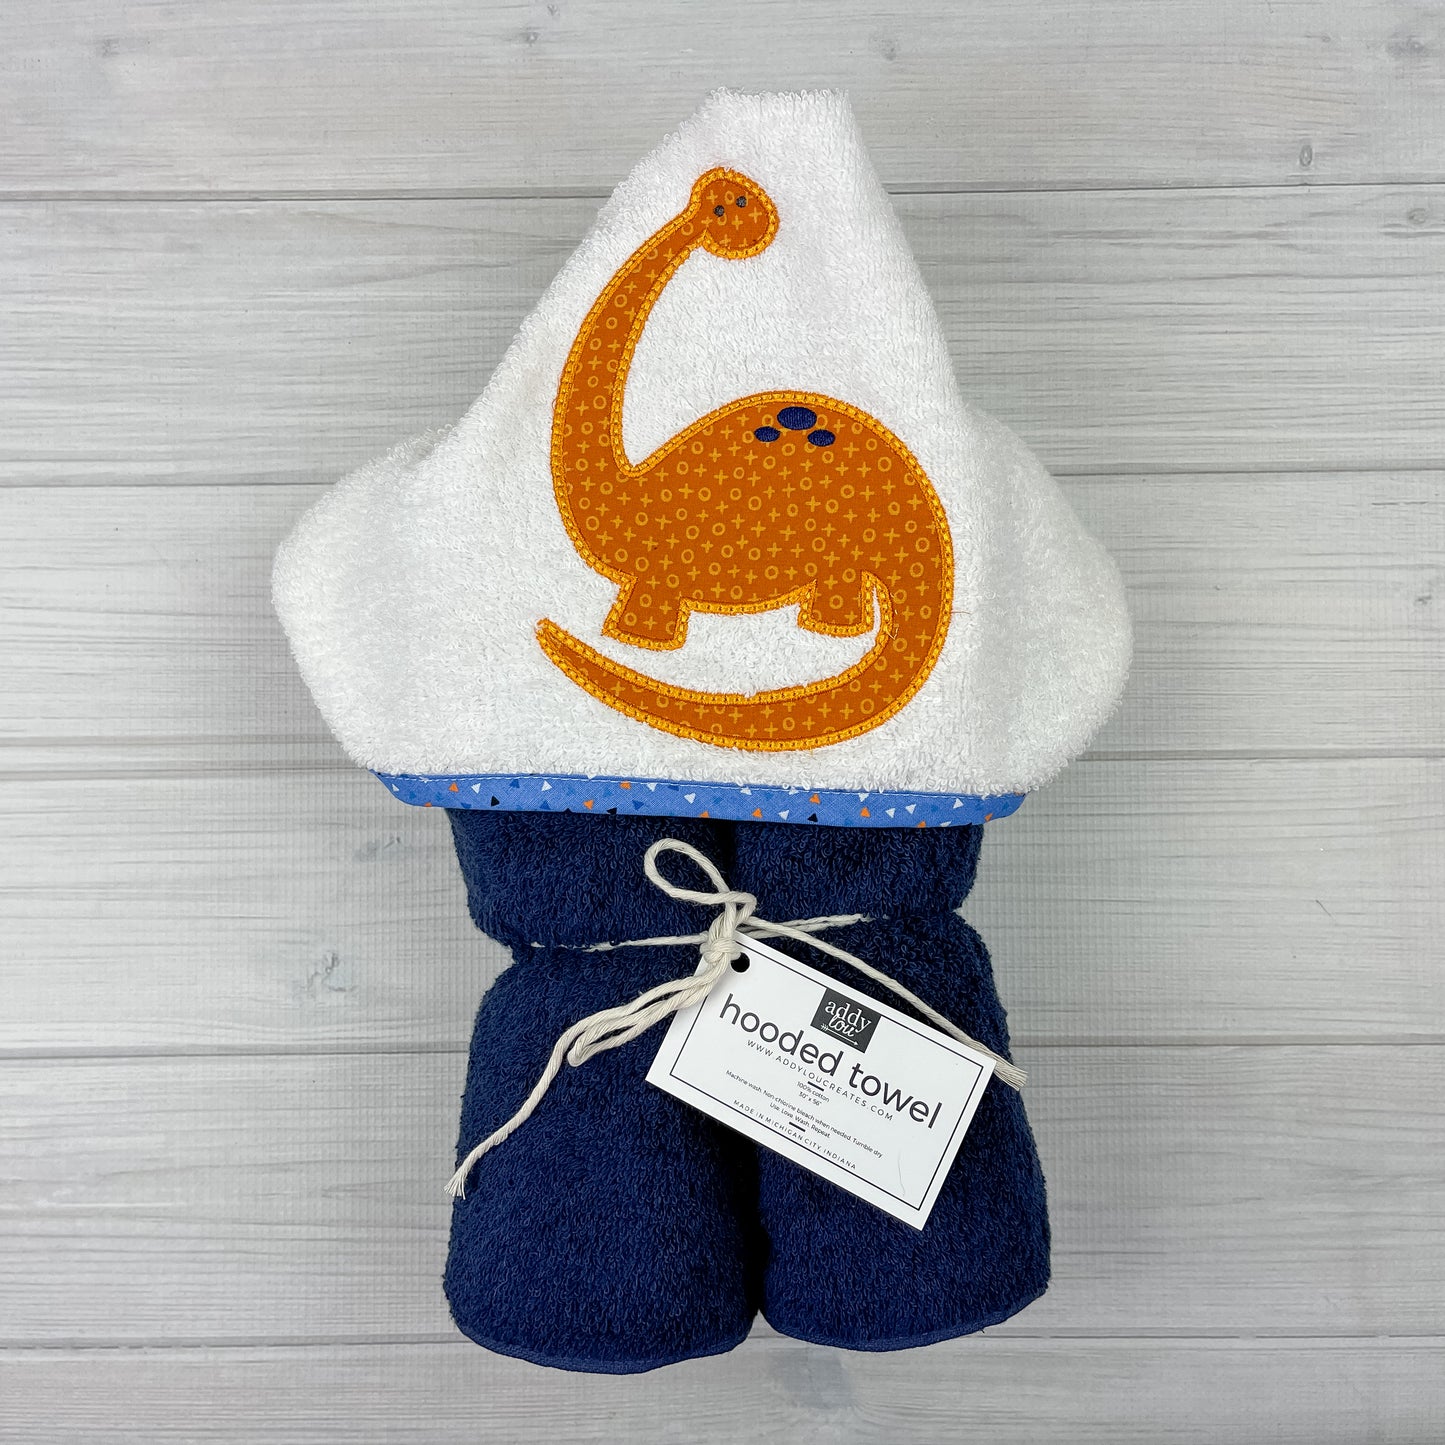 Navy blue hooded towel with orange brontosaurus embroidered  on a white hood.  Binding is medium blue with orange, white, and black triangles.